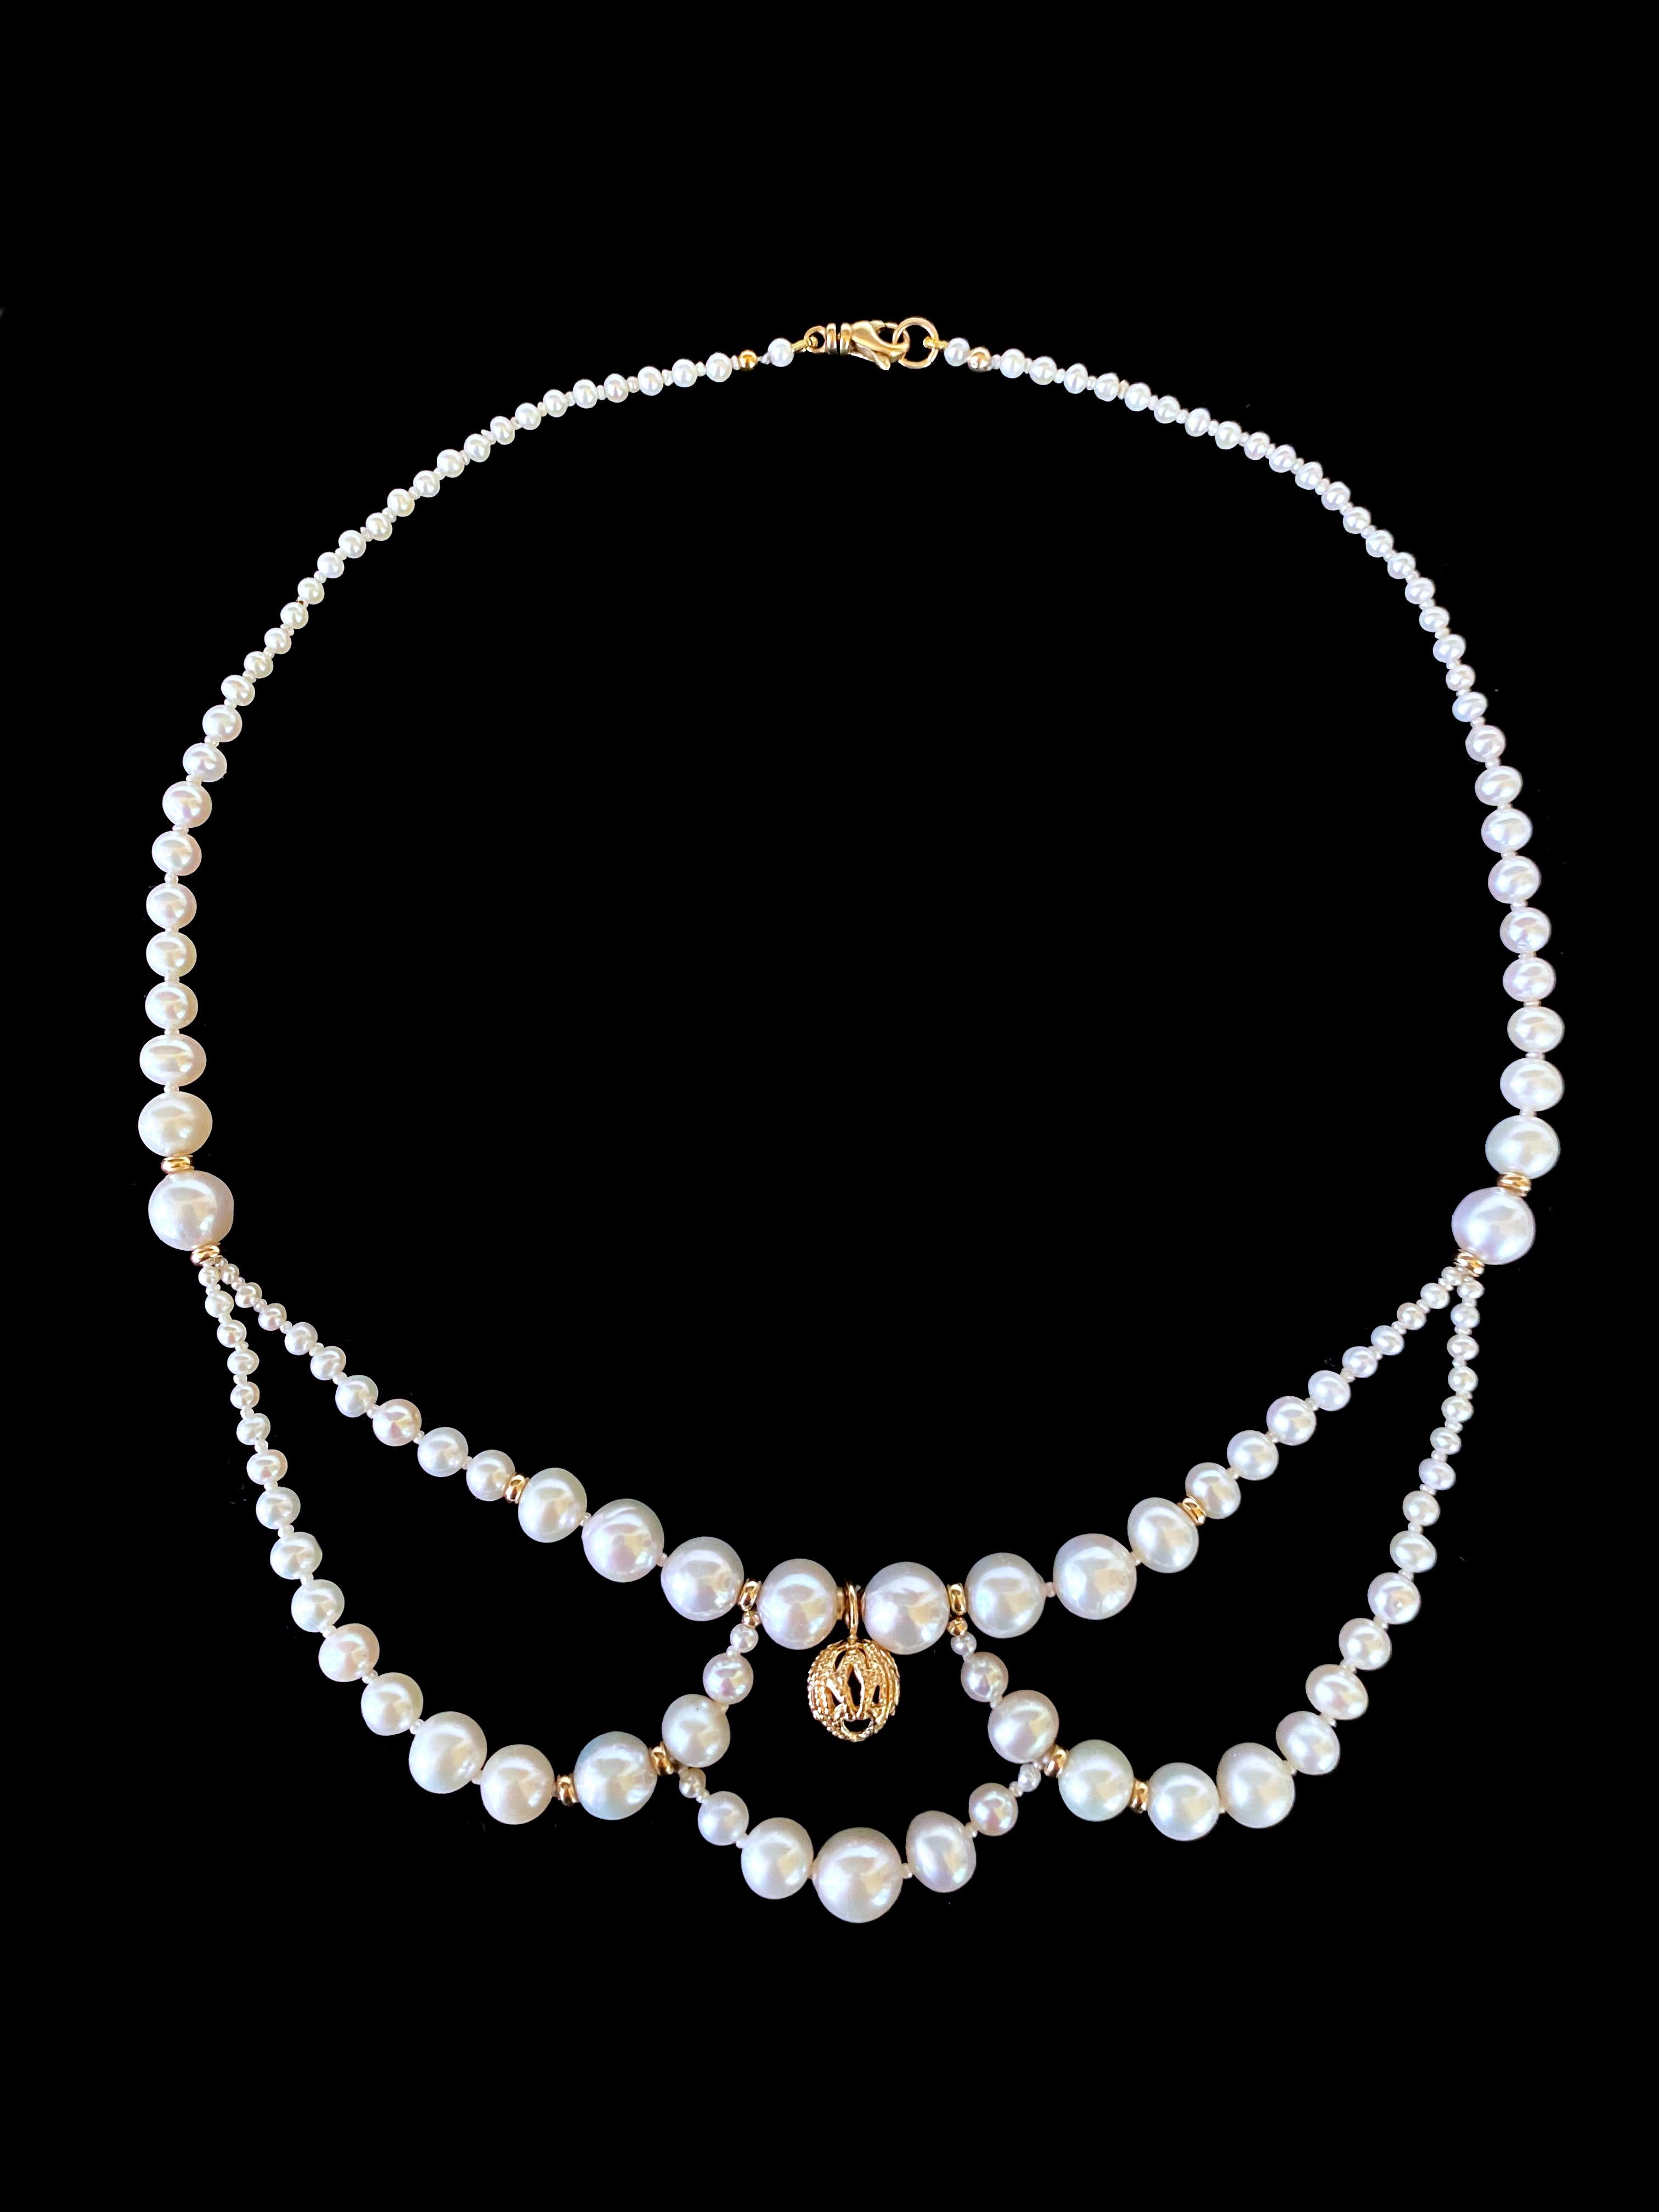 Hand woven piece by Marina J. This Victorian inspired Necklace is made of all cultured Pearls and solid 14k Yellow Gold beads. The Pearls display a seamless graduation in size leading to the solid 14k Yellow Gold Filigree Centerpiece. Each Pearl in